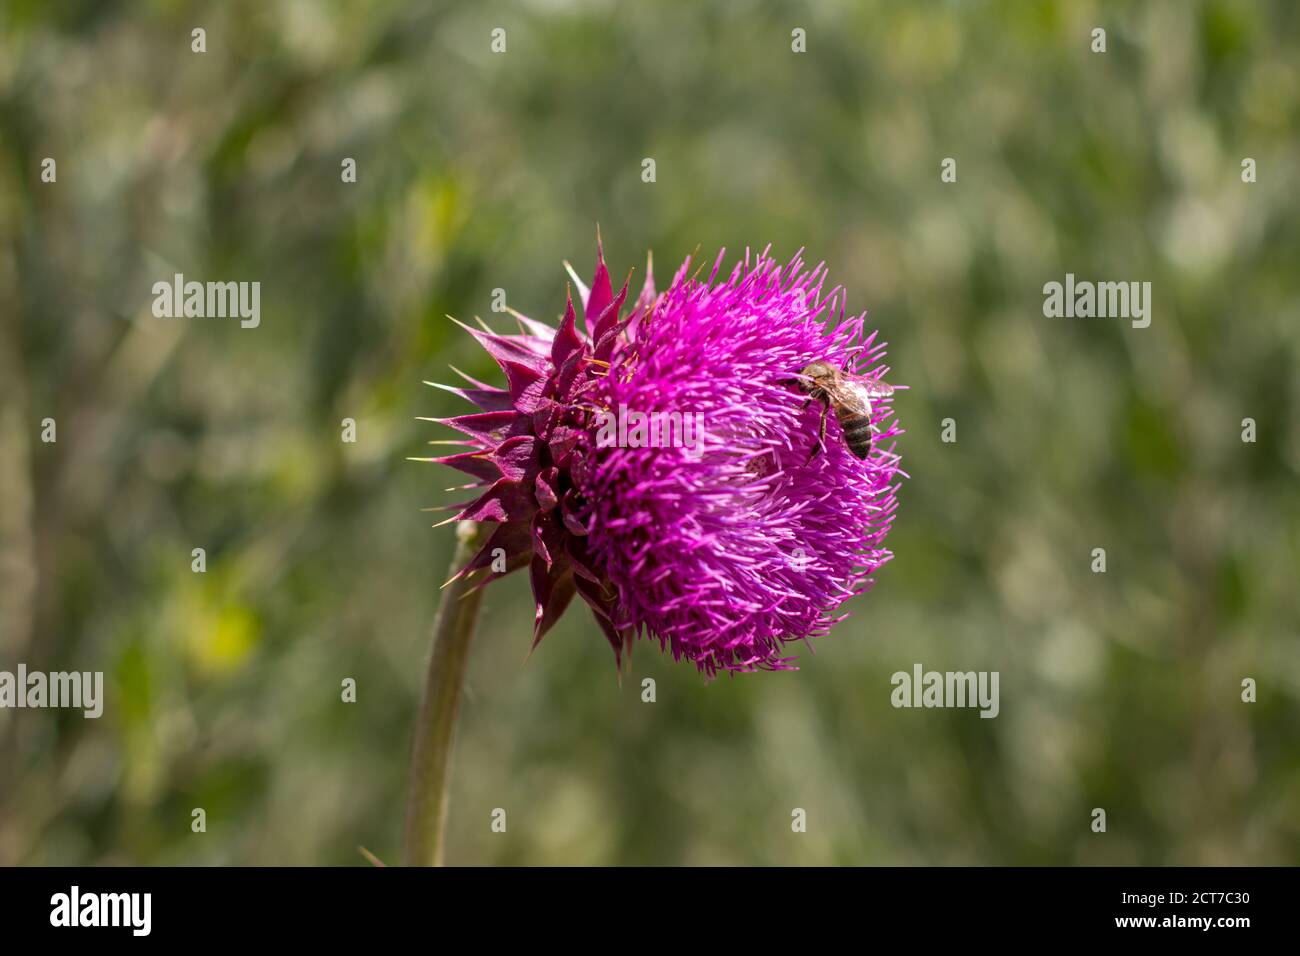 Thistle flower on an unfocused background Stock Photo